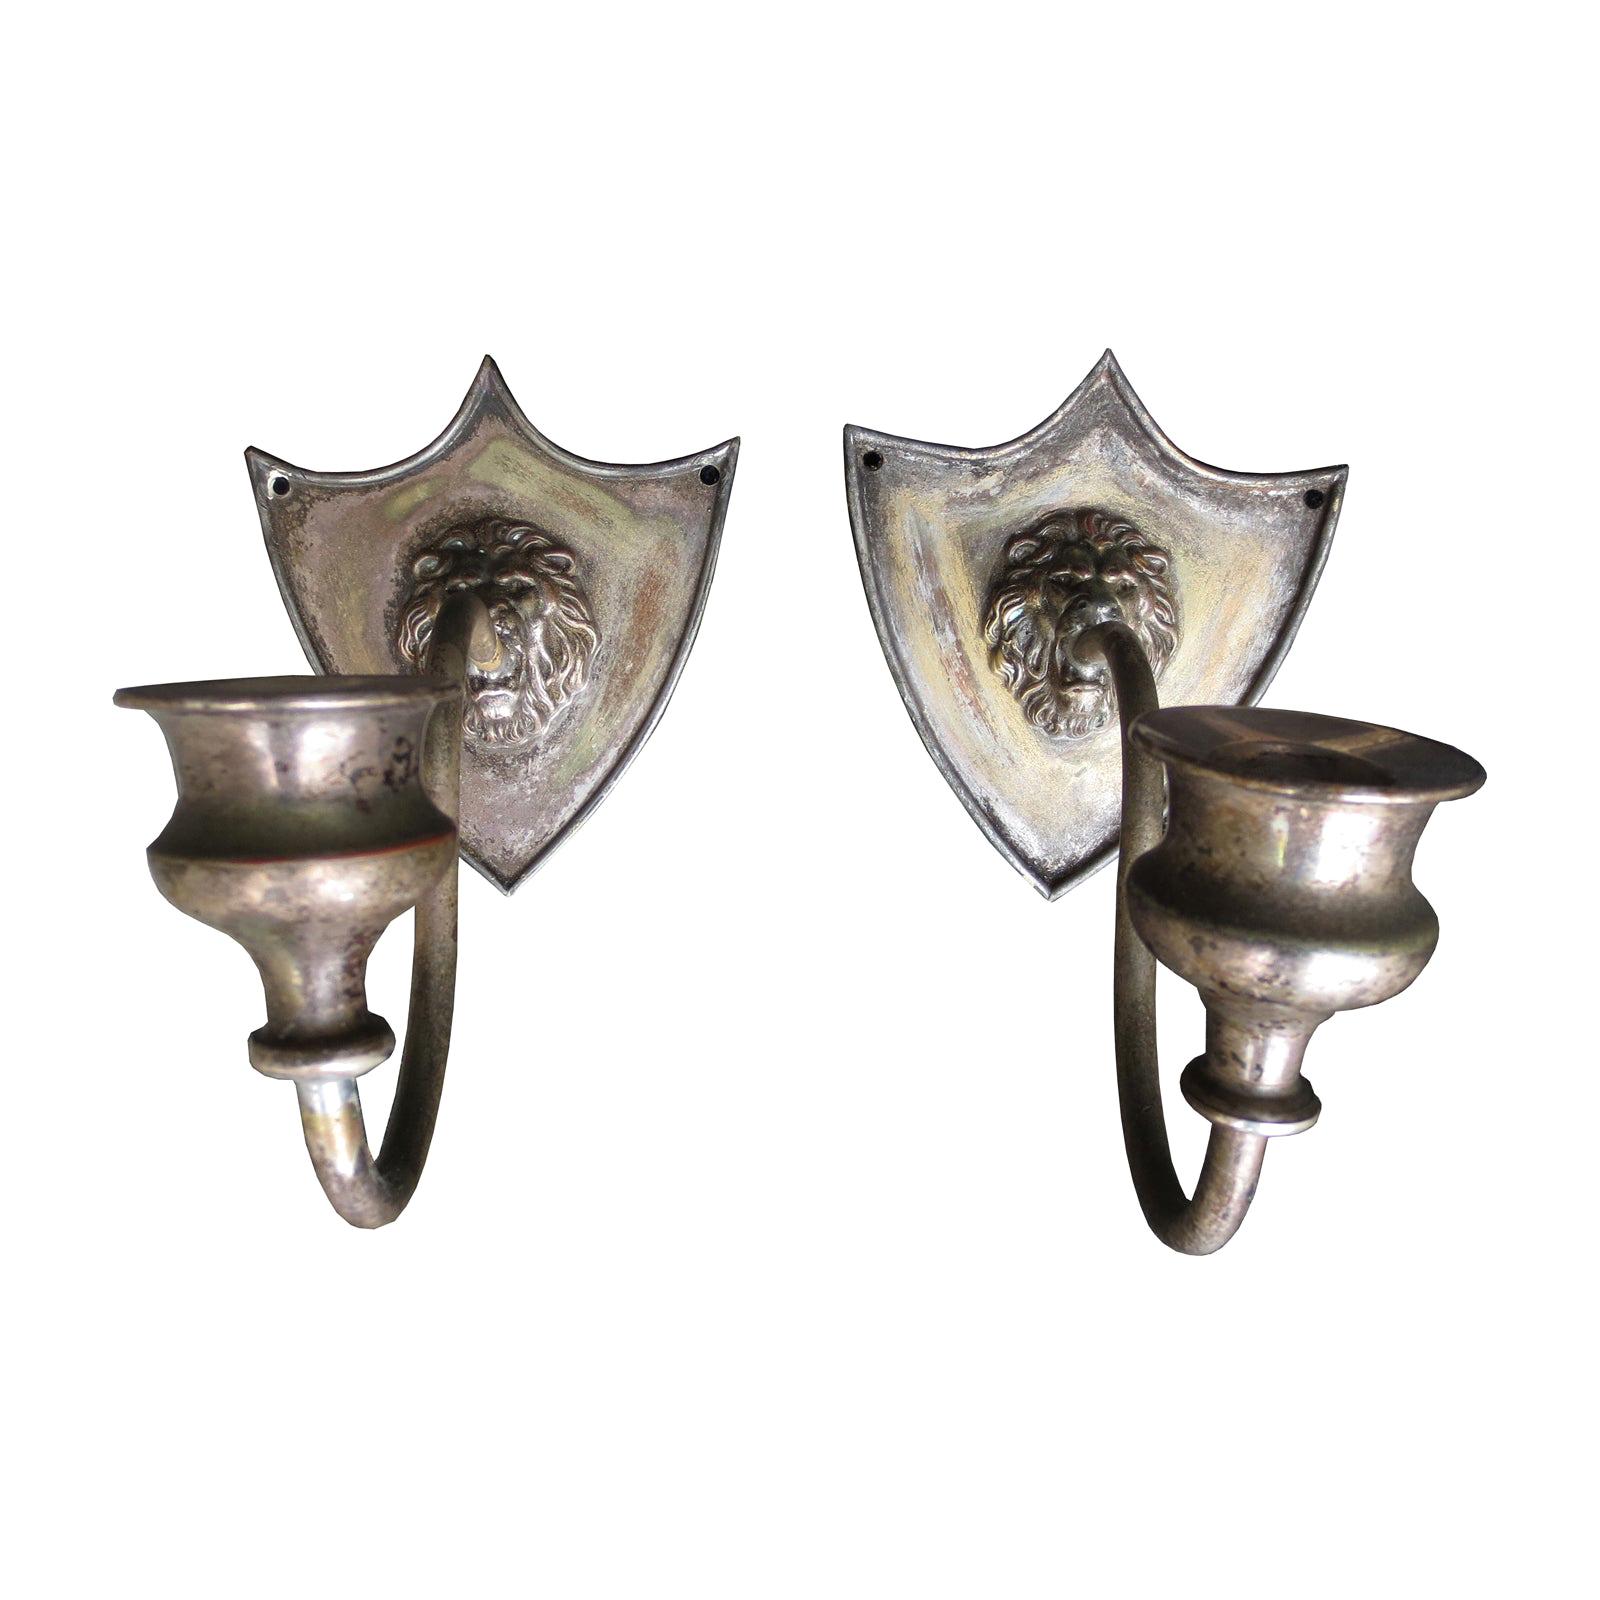 Pair of 19th Century Silvered One-Arm Sconces with Lions Heads